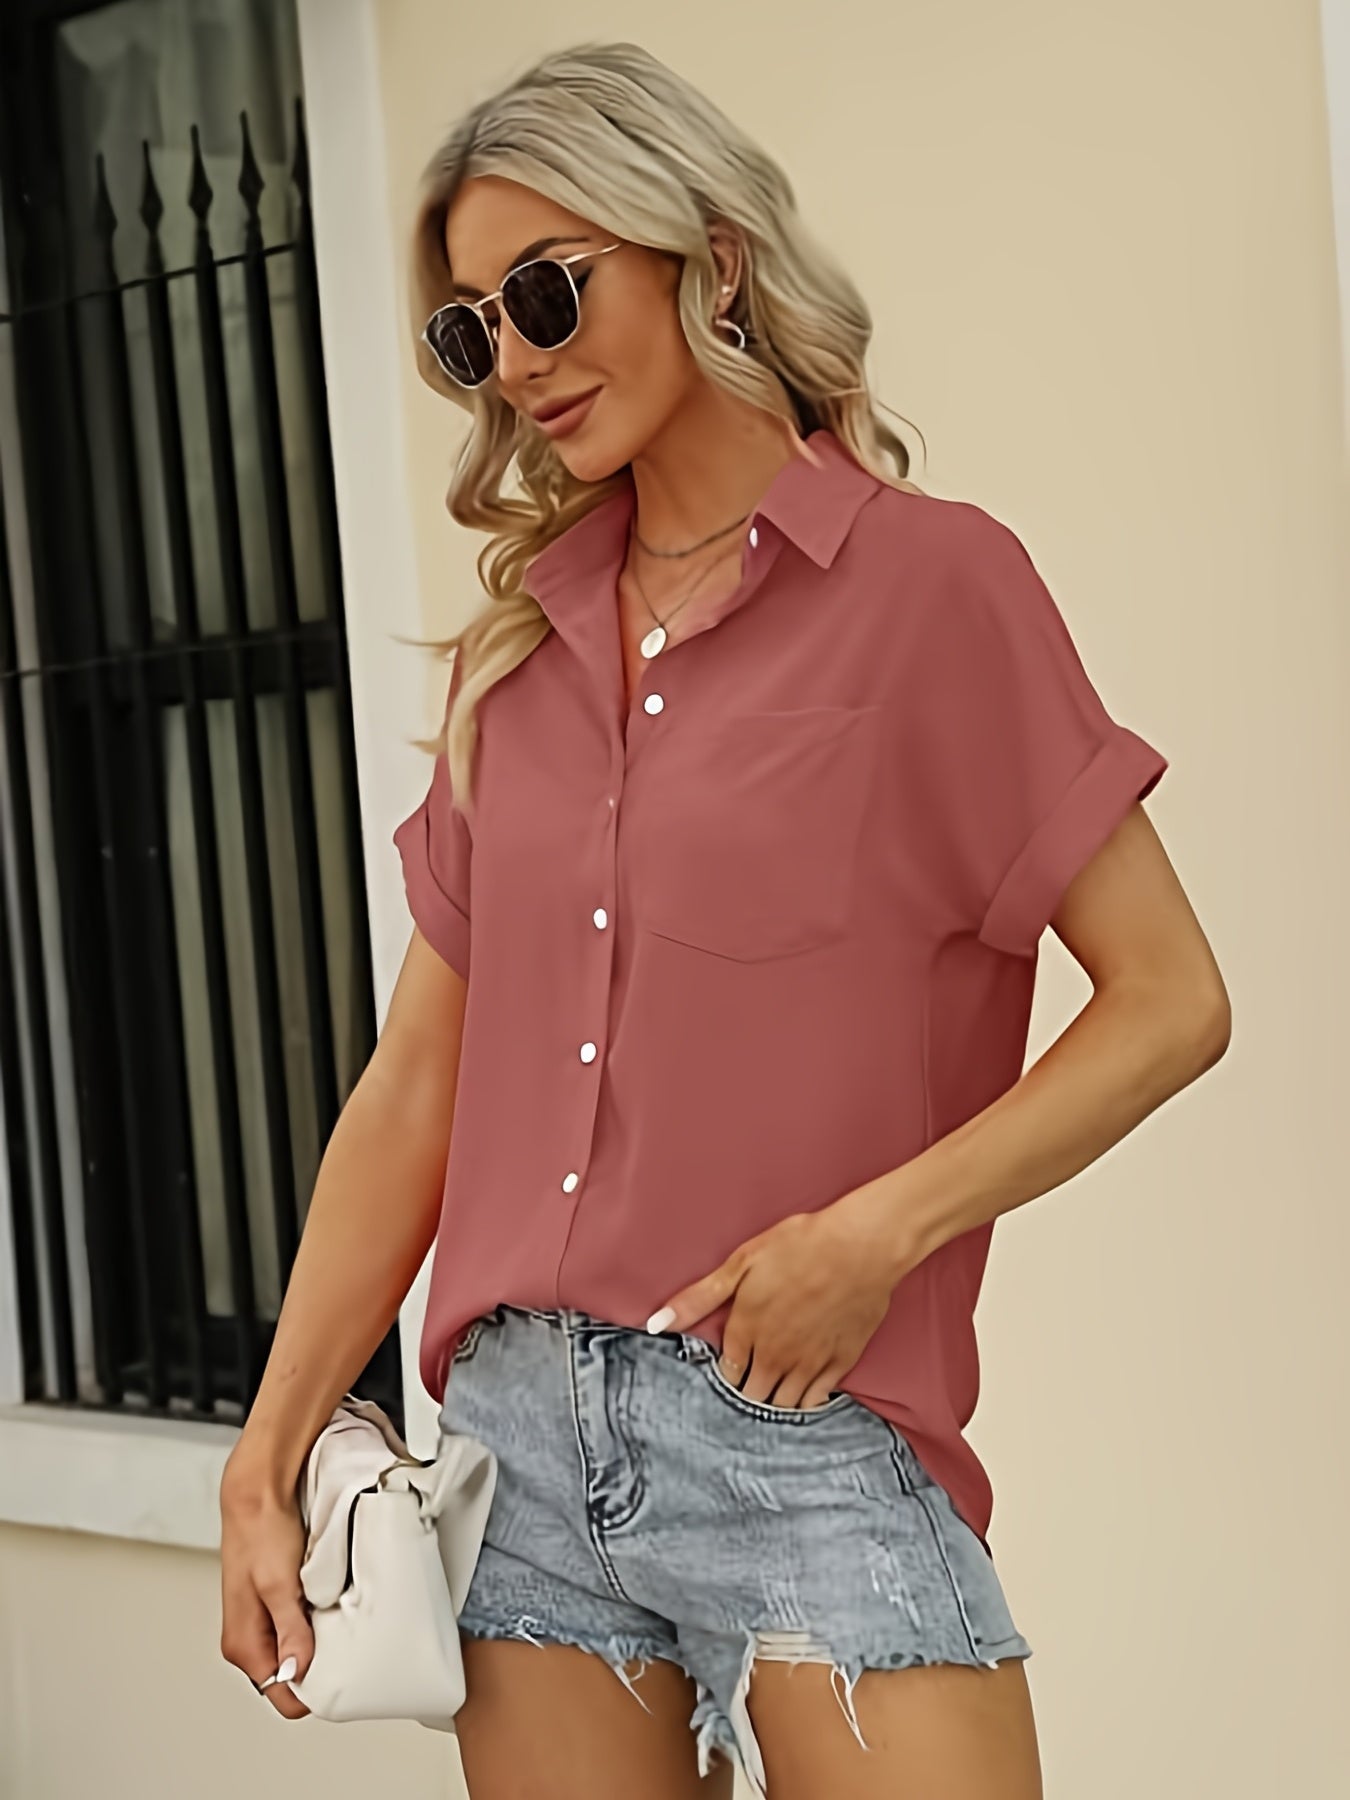 「lovevop」V-neck Loose Lapel Blouses, Casual Button Down Pockets Short Sleeve Fashion Shirts Tops, Women's Clothing